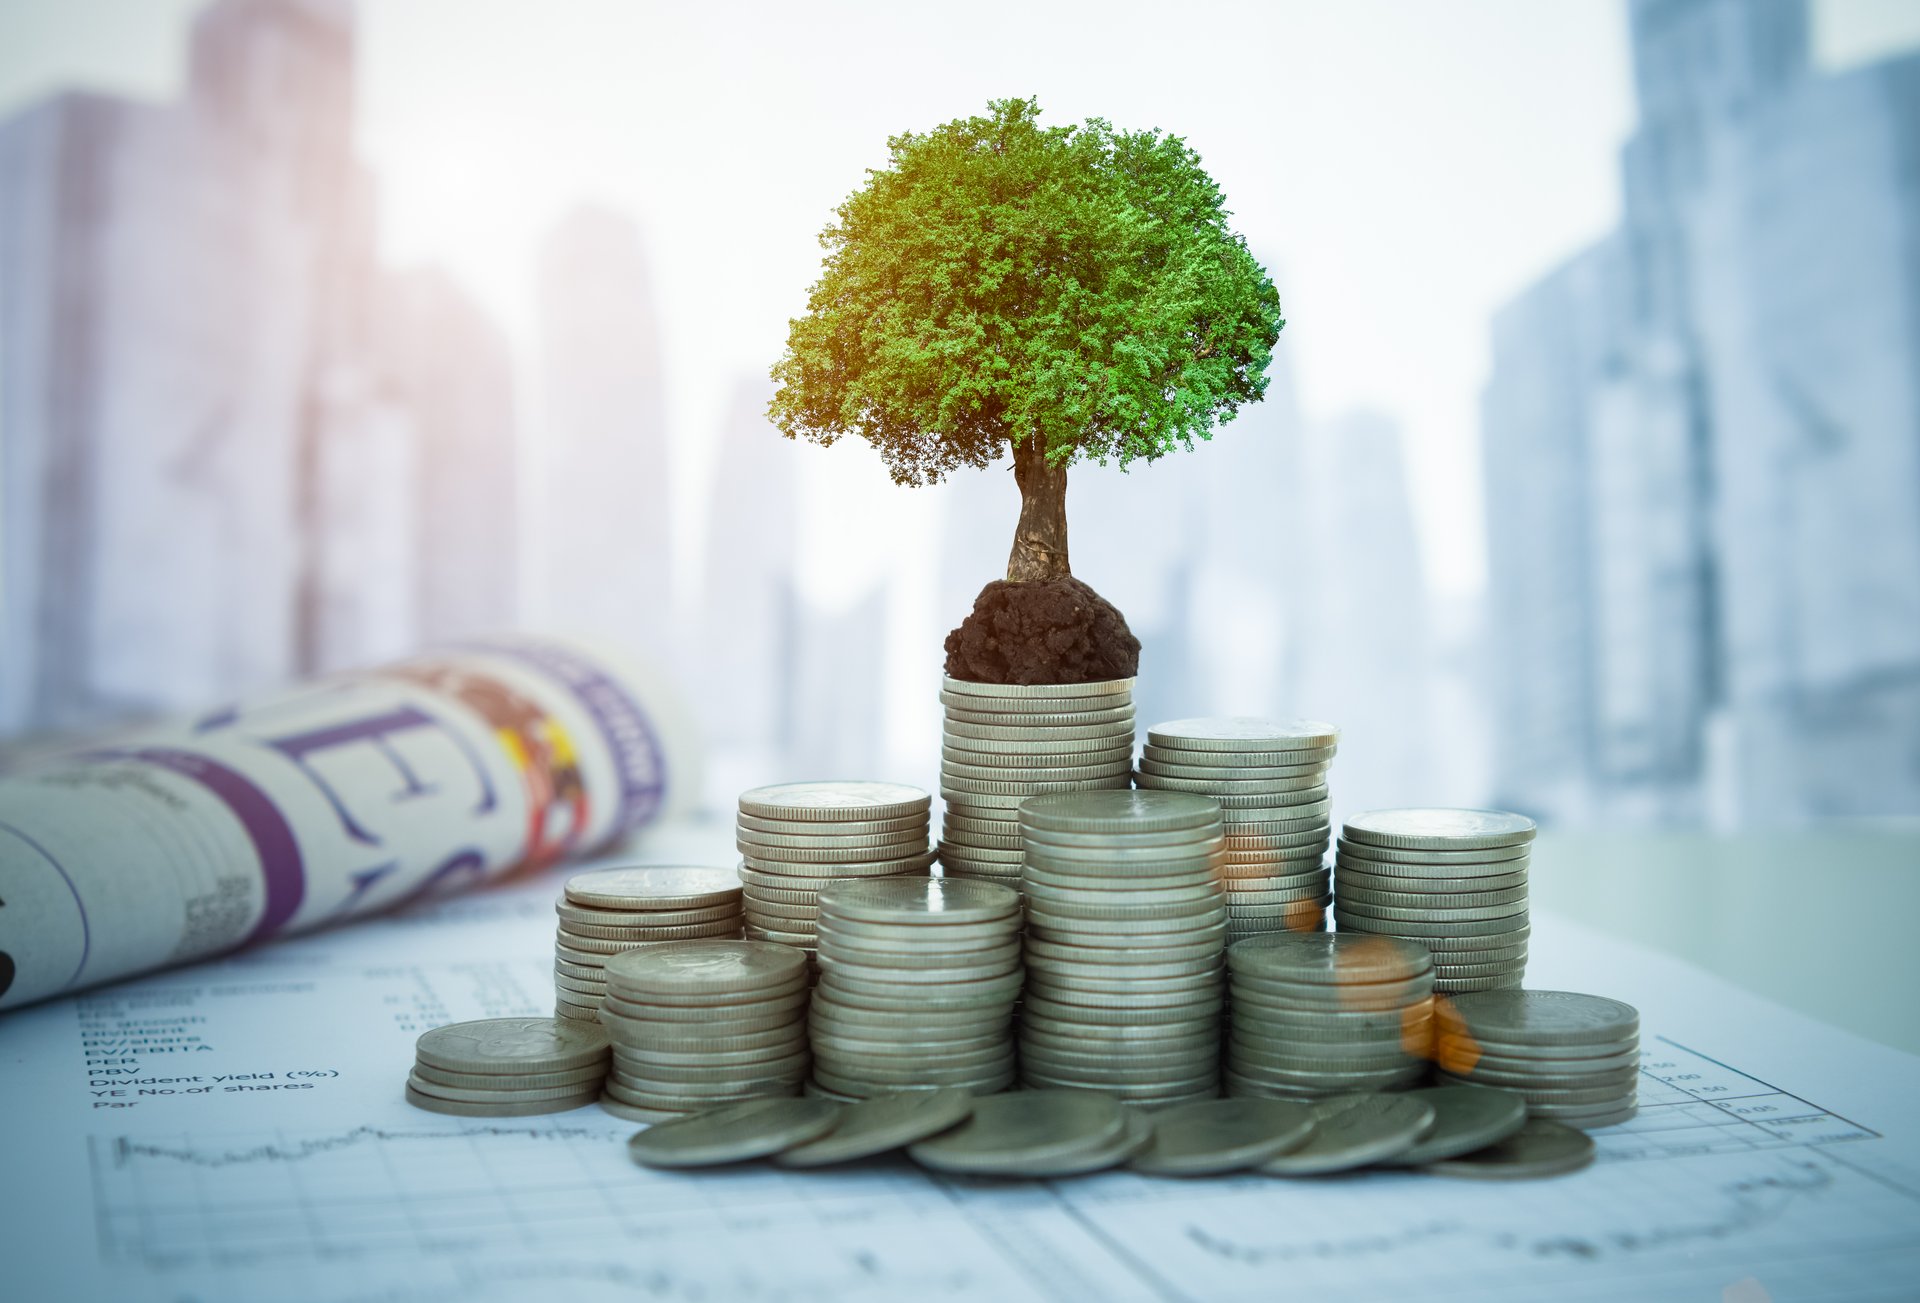 A tree symbolizing investment growth